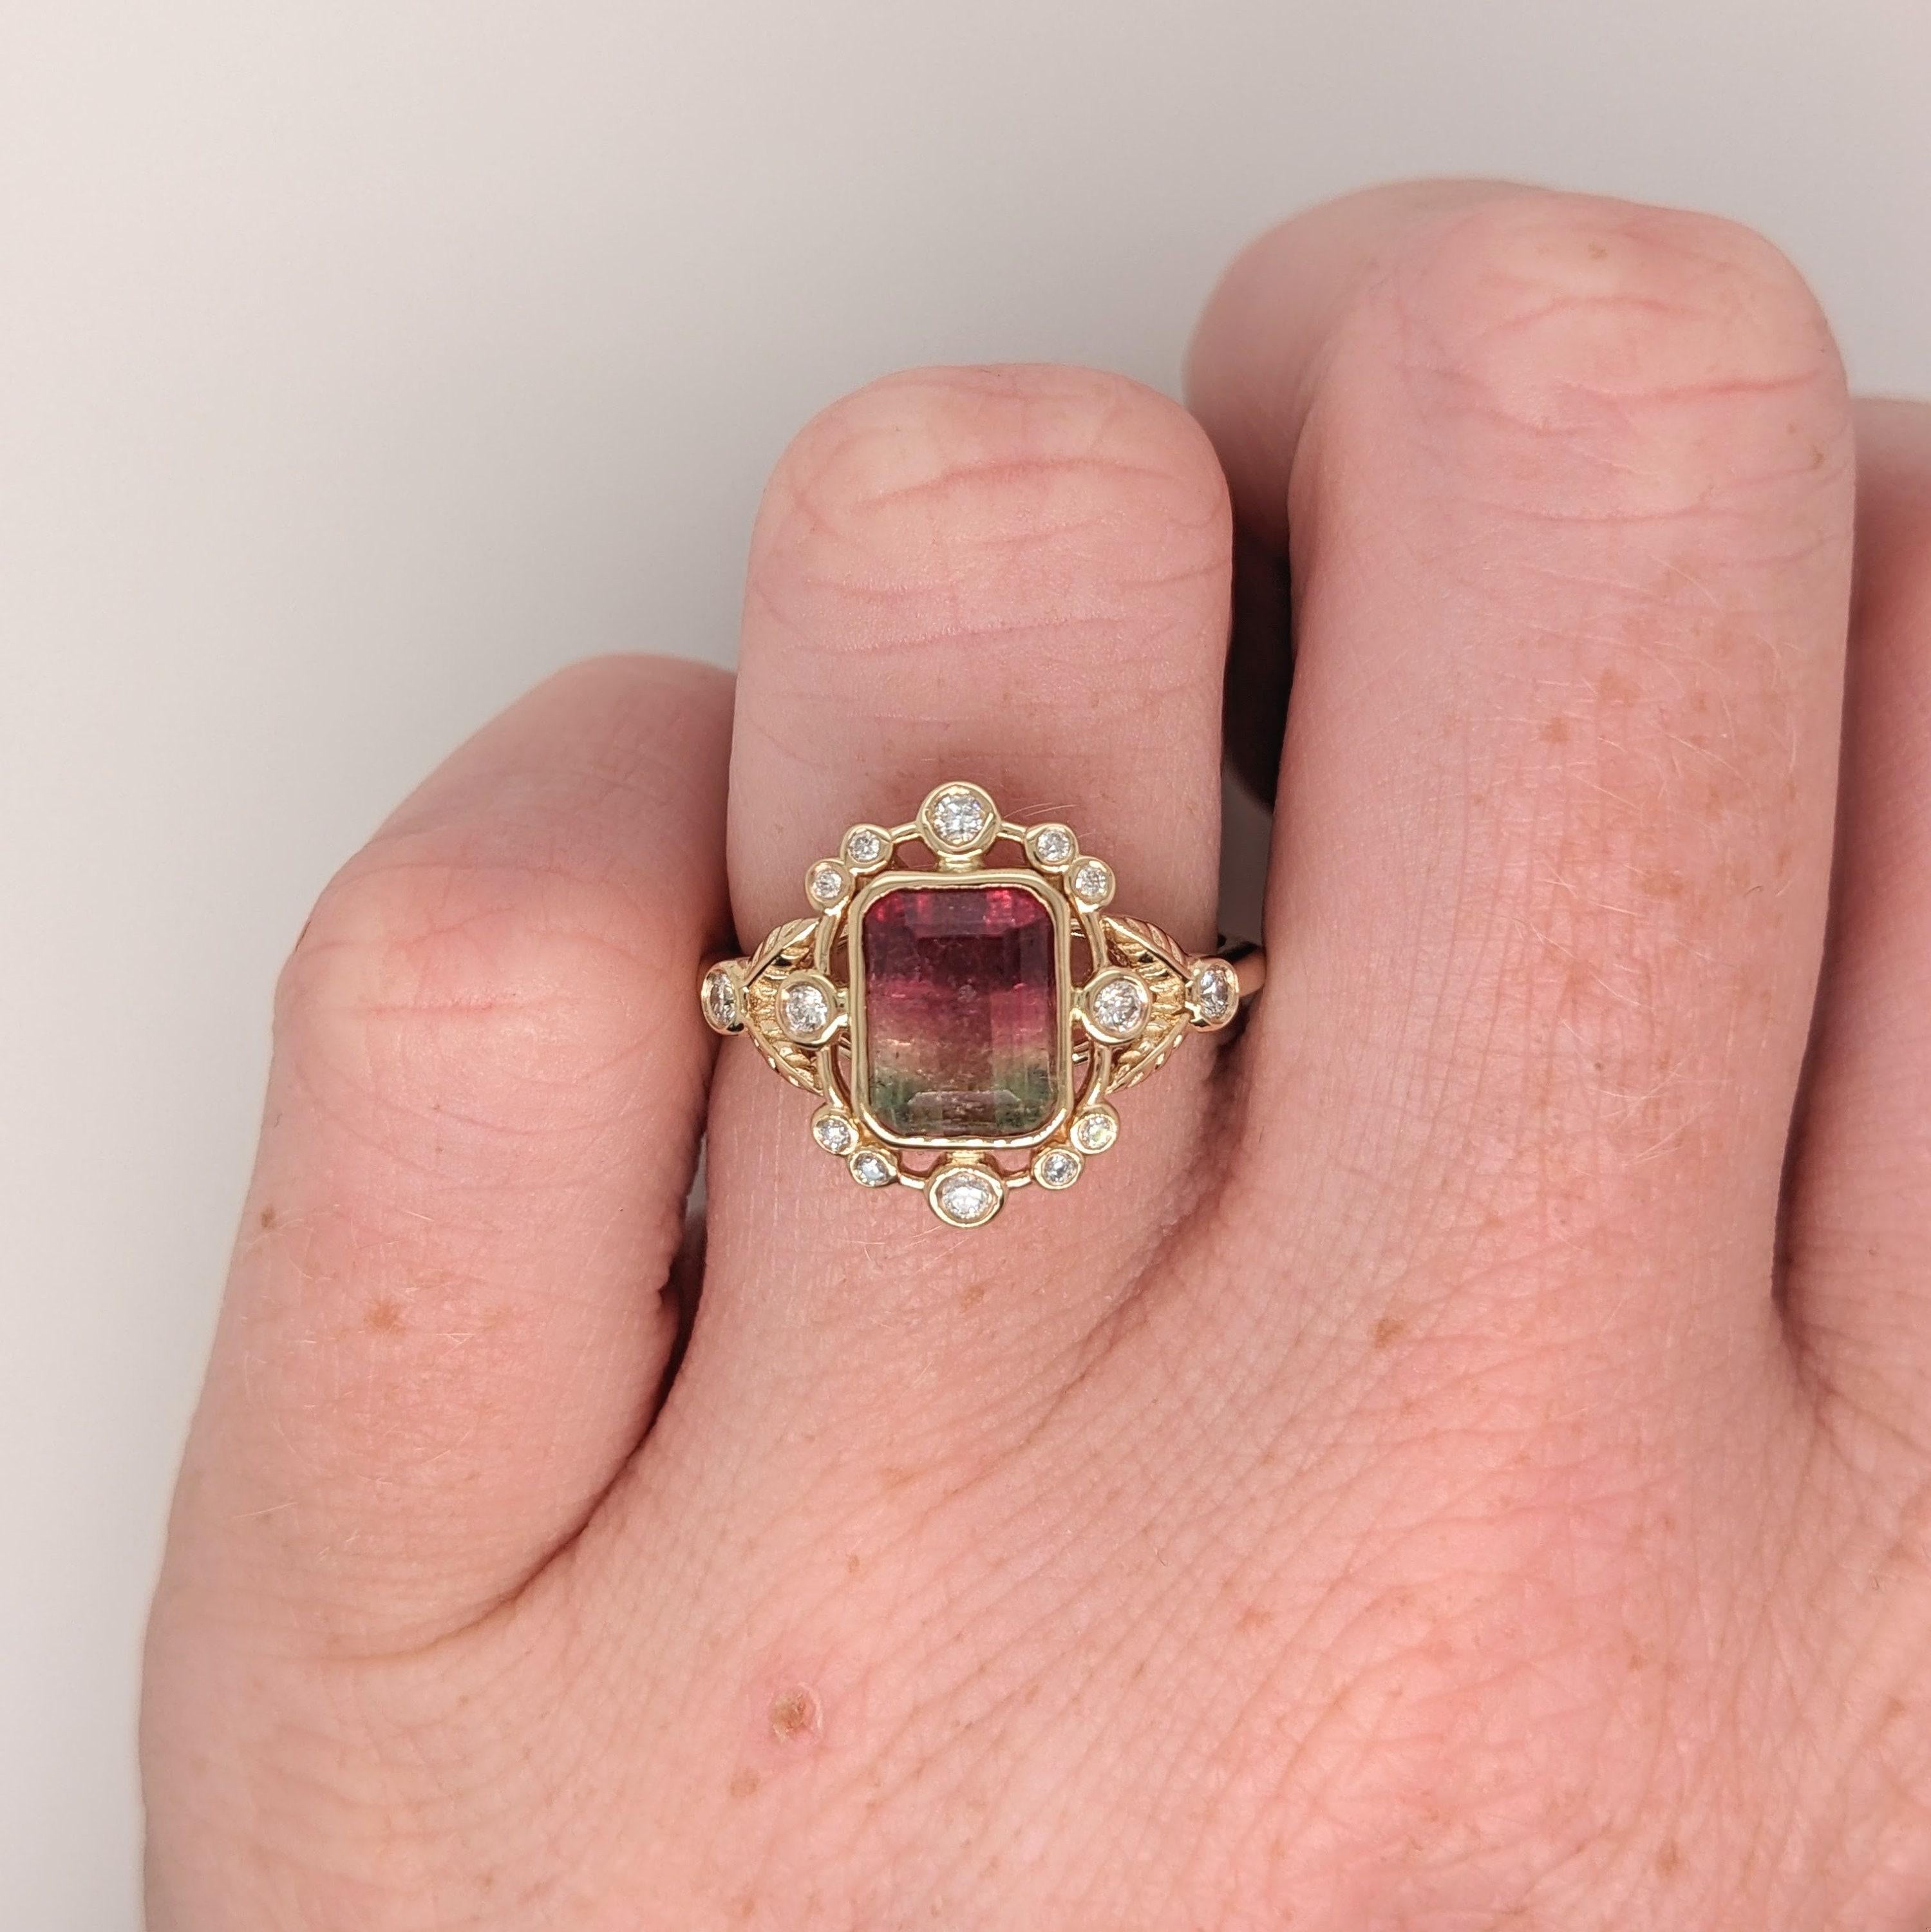 A gorgeous watermelon tourmaline emerald cut and bezel set in a lovely 14k yellow gold setting with natural diamond accents. A beautiful collection piece that is perfect for every occasion.  💕

Specifications

Item Type: Ring
Center